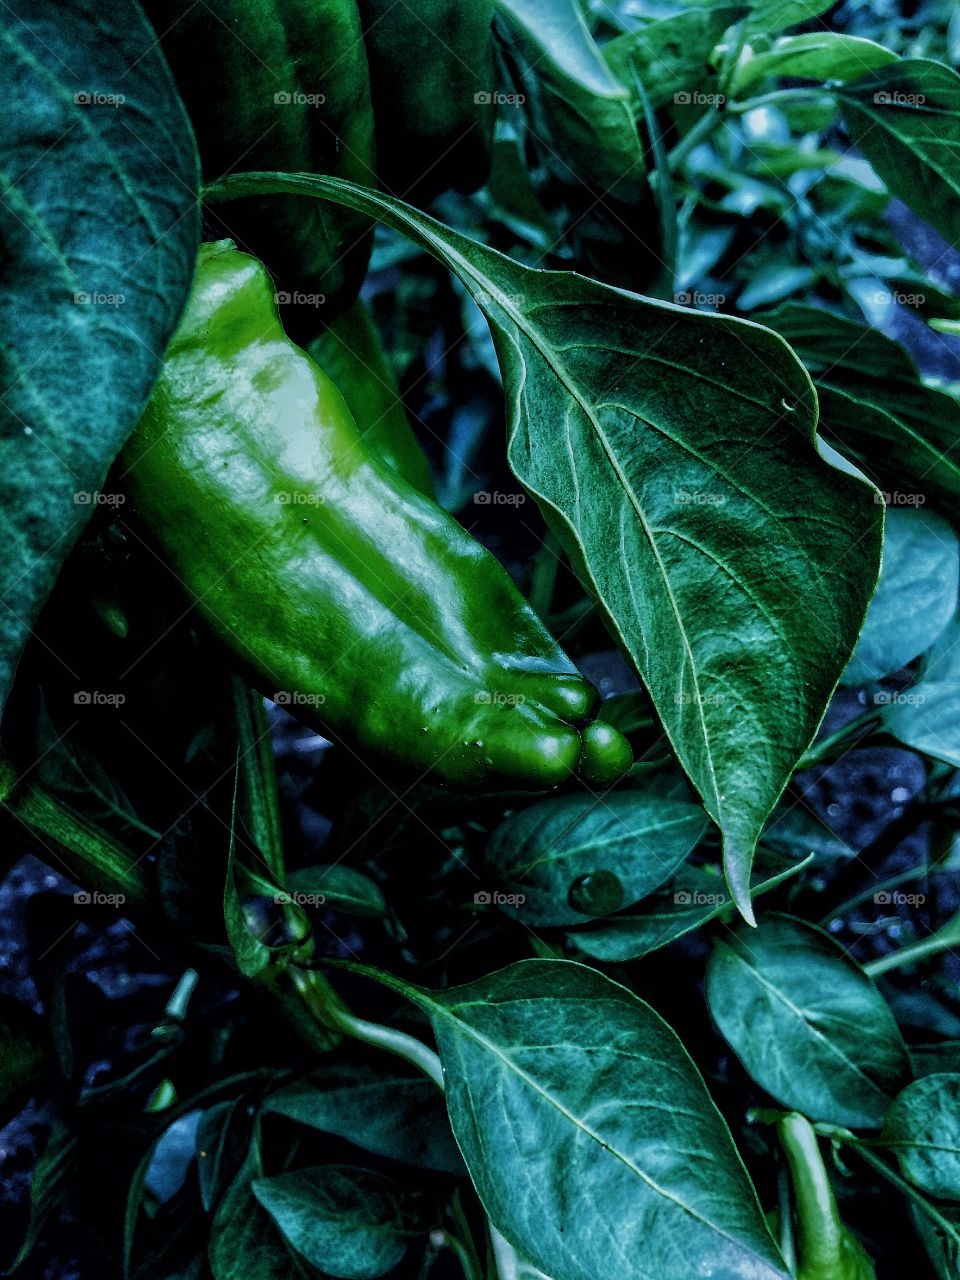 Green peppers 